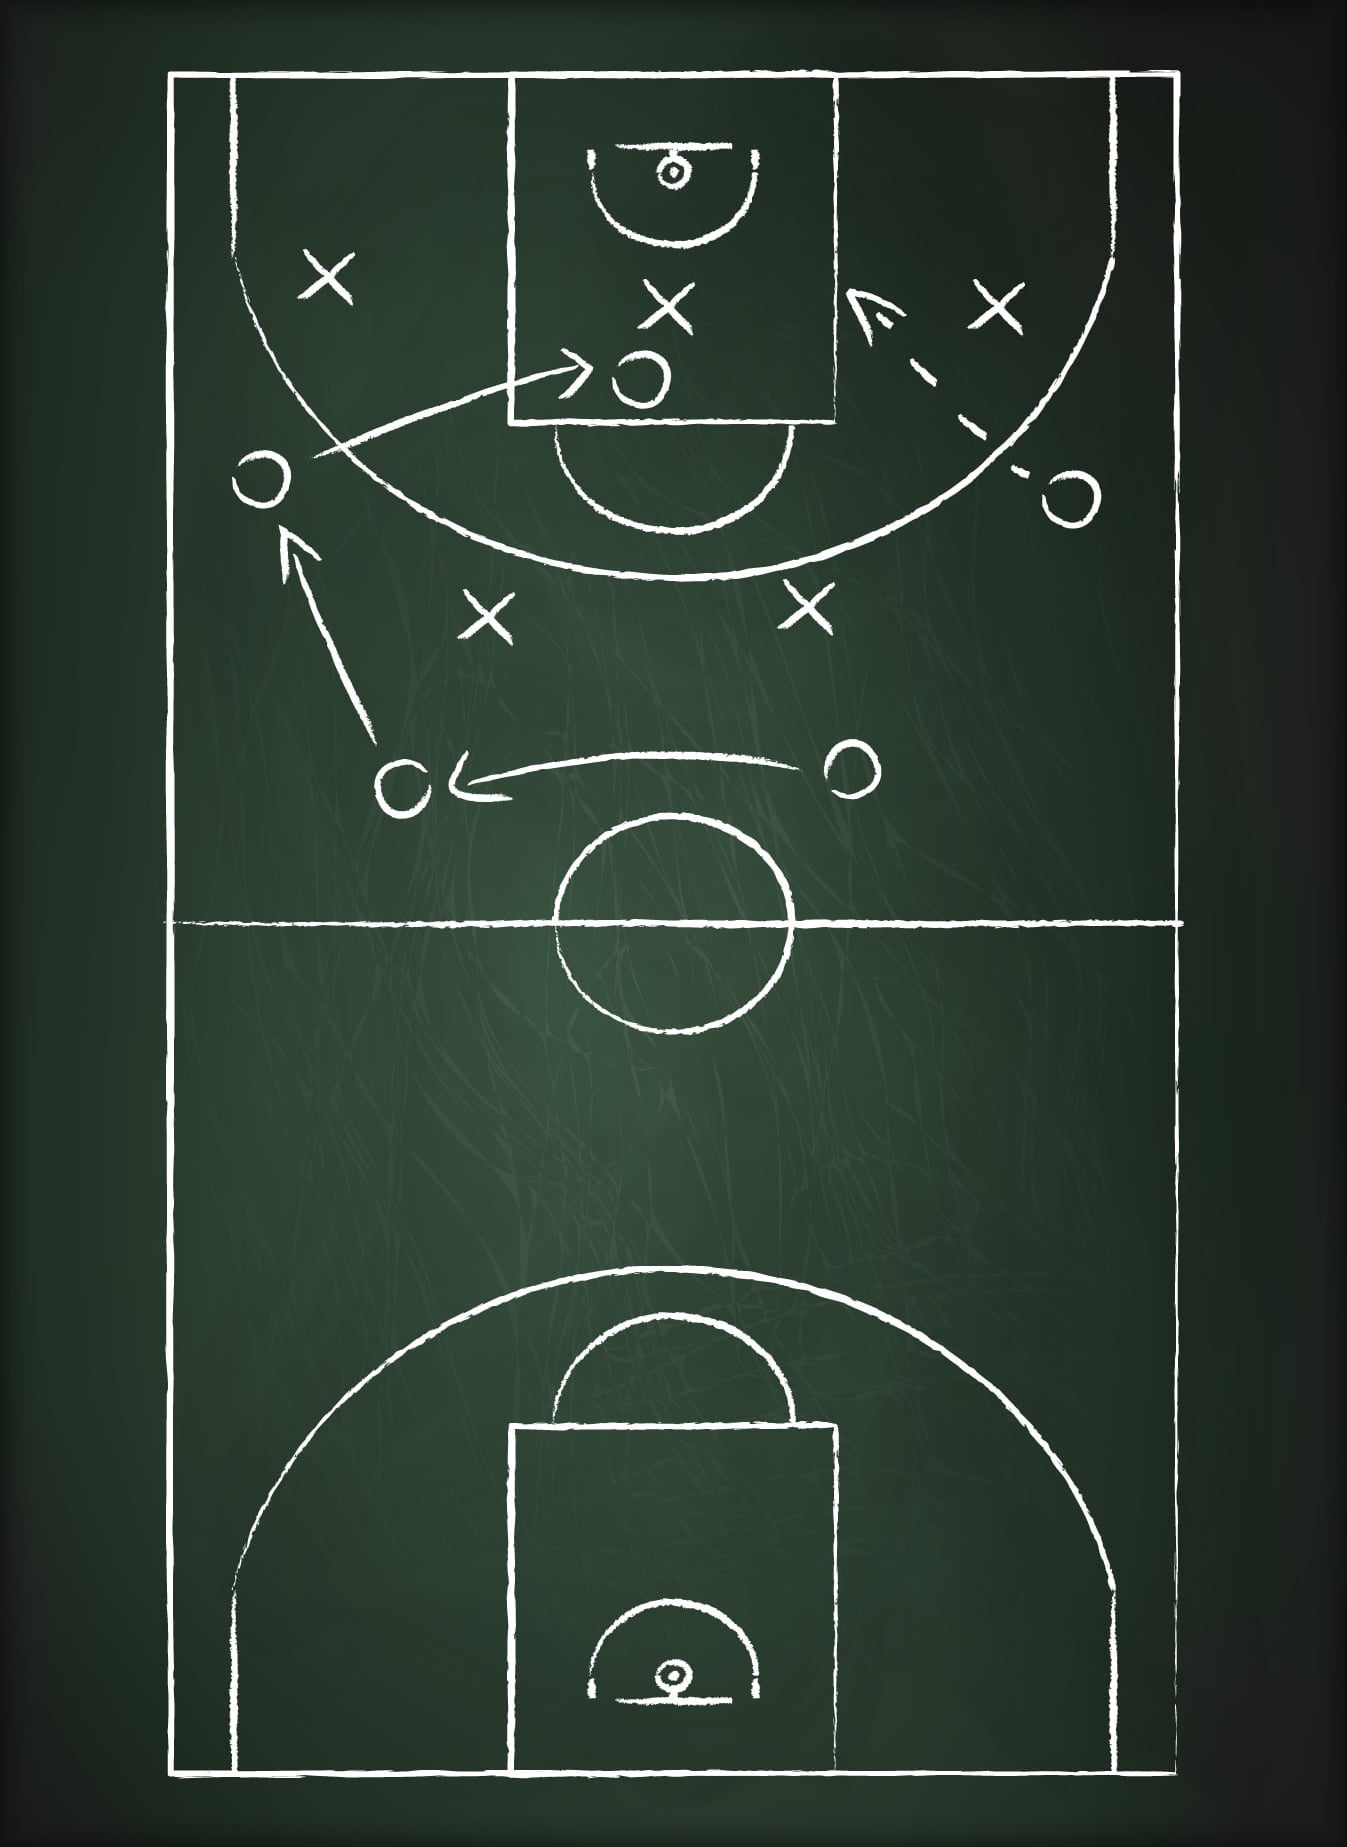 A chalkboard with a game plan diagram drawn on it. Make your financial game plan with a contract loan.